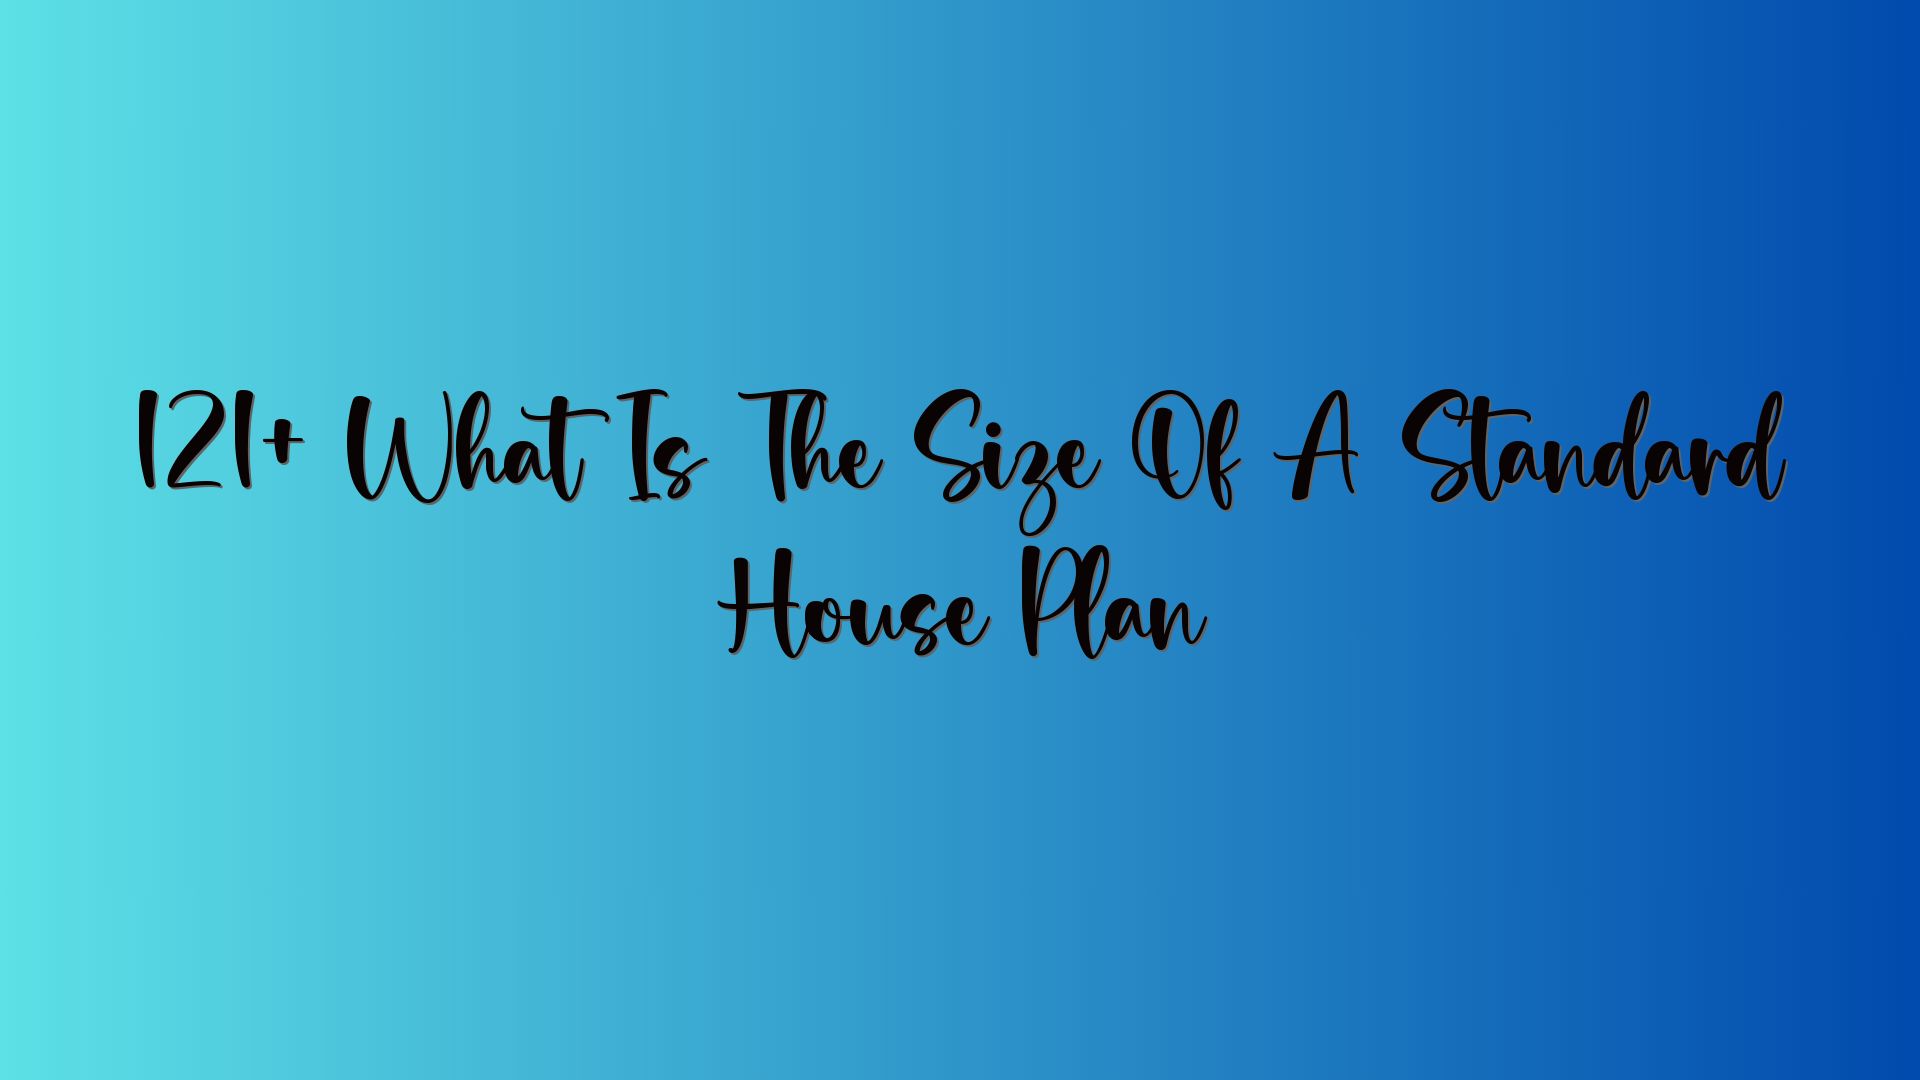 121+ What Is The Size Of A Standard House Plan